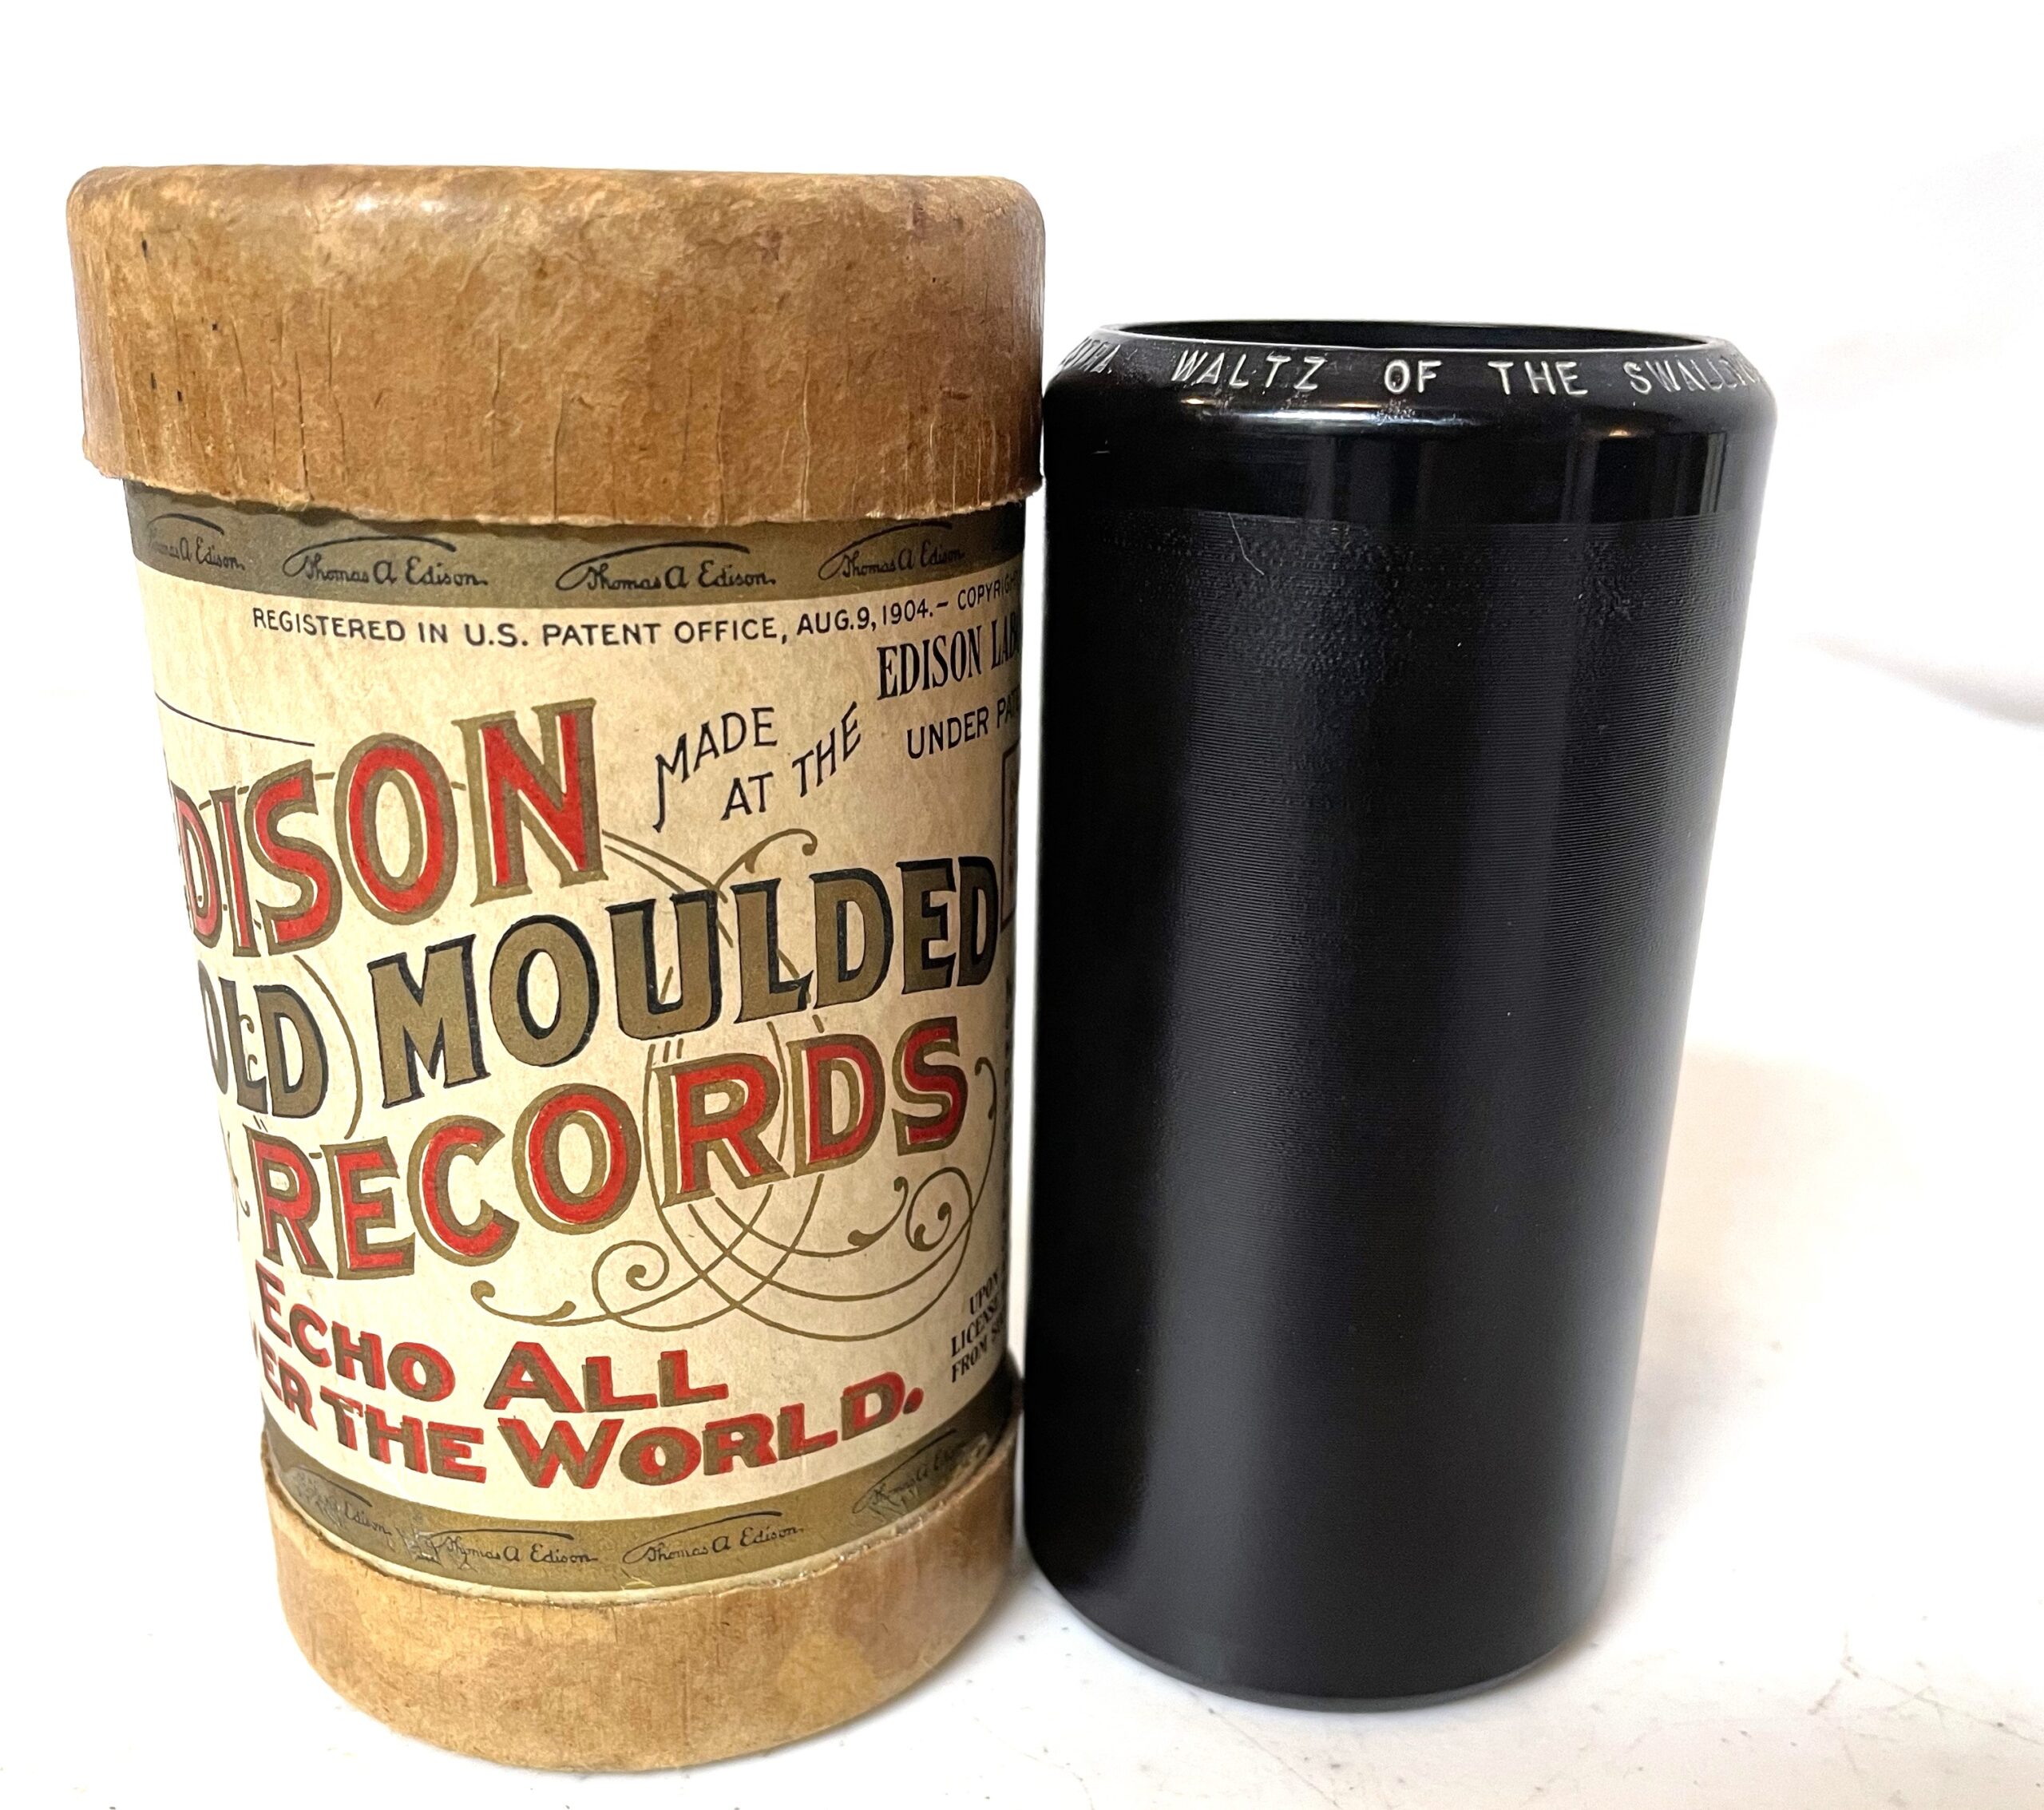 Edison 2-minute Cylinder…”The Next Horse I Ride on” (Comic Song)